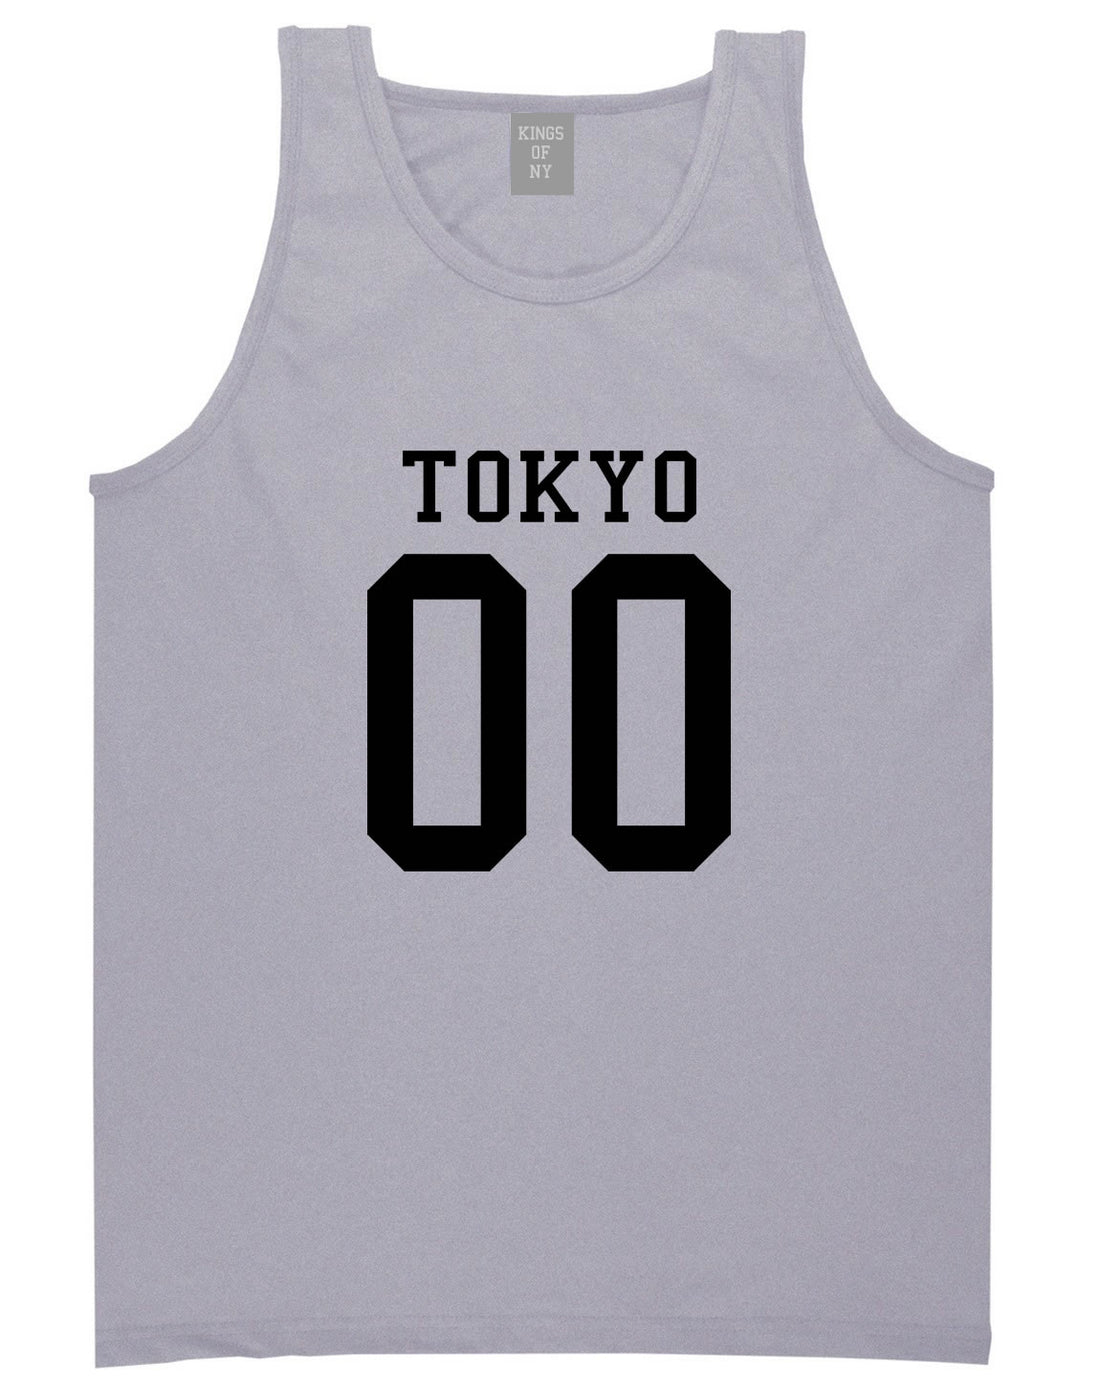 Tokyo Team 00 Jersey Japan Tank Top in Grey By Kings Of NY